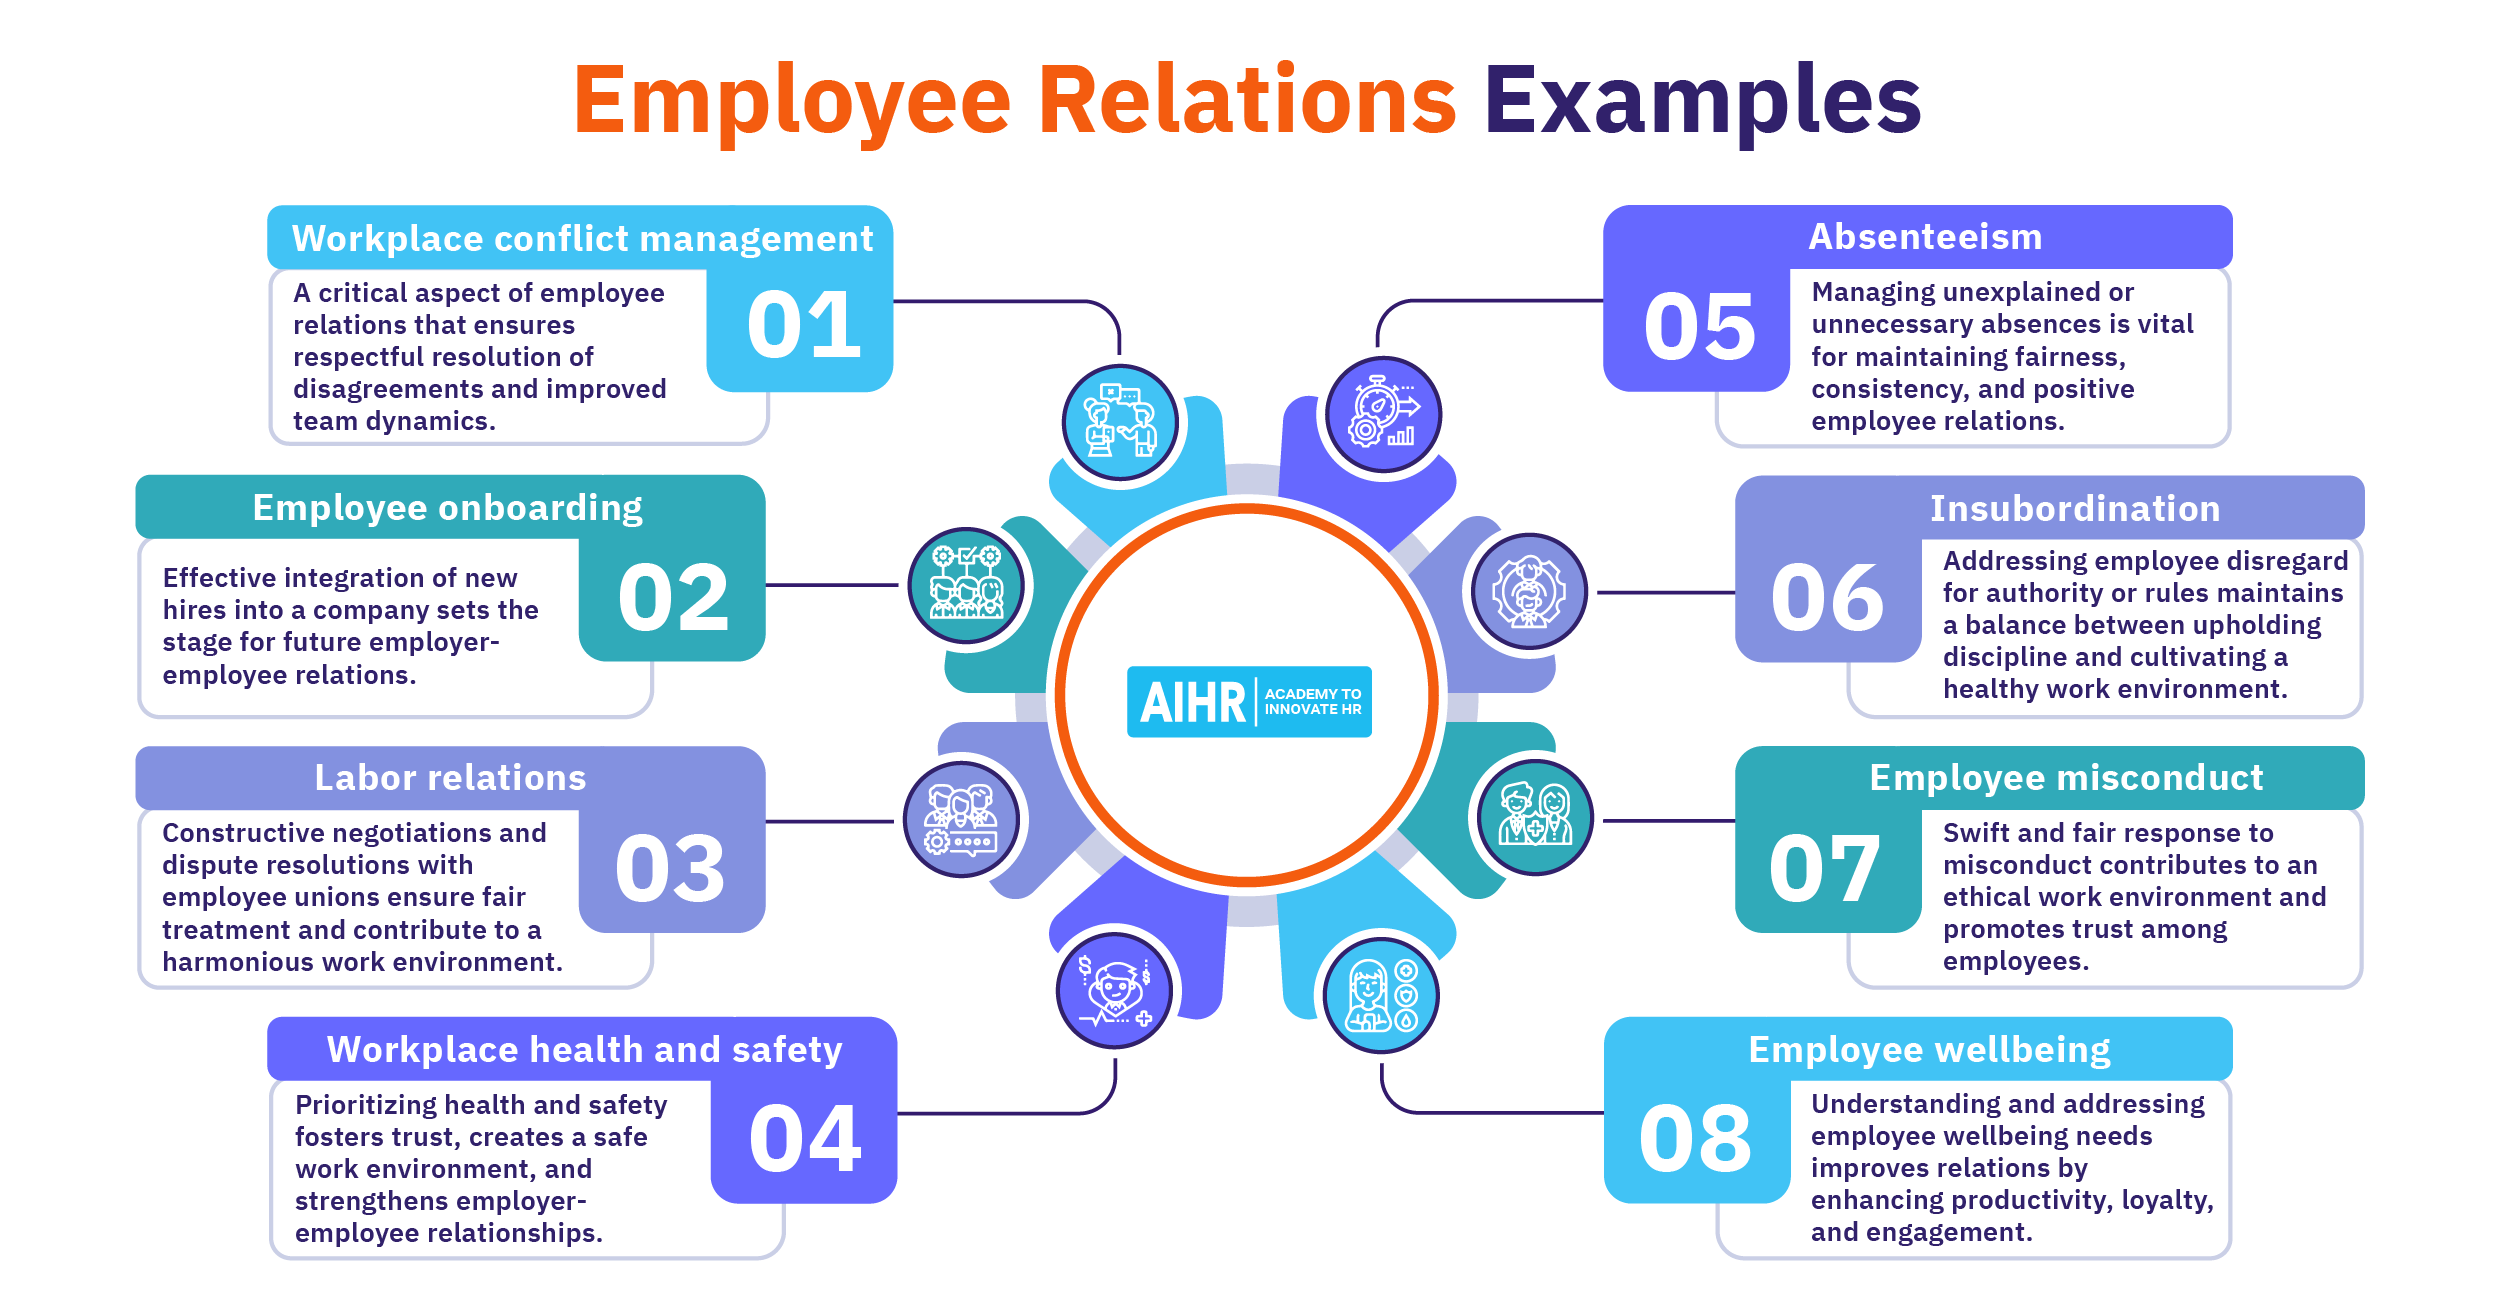 What Does Relationship to Employee Mean